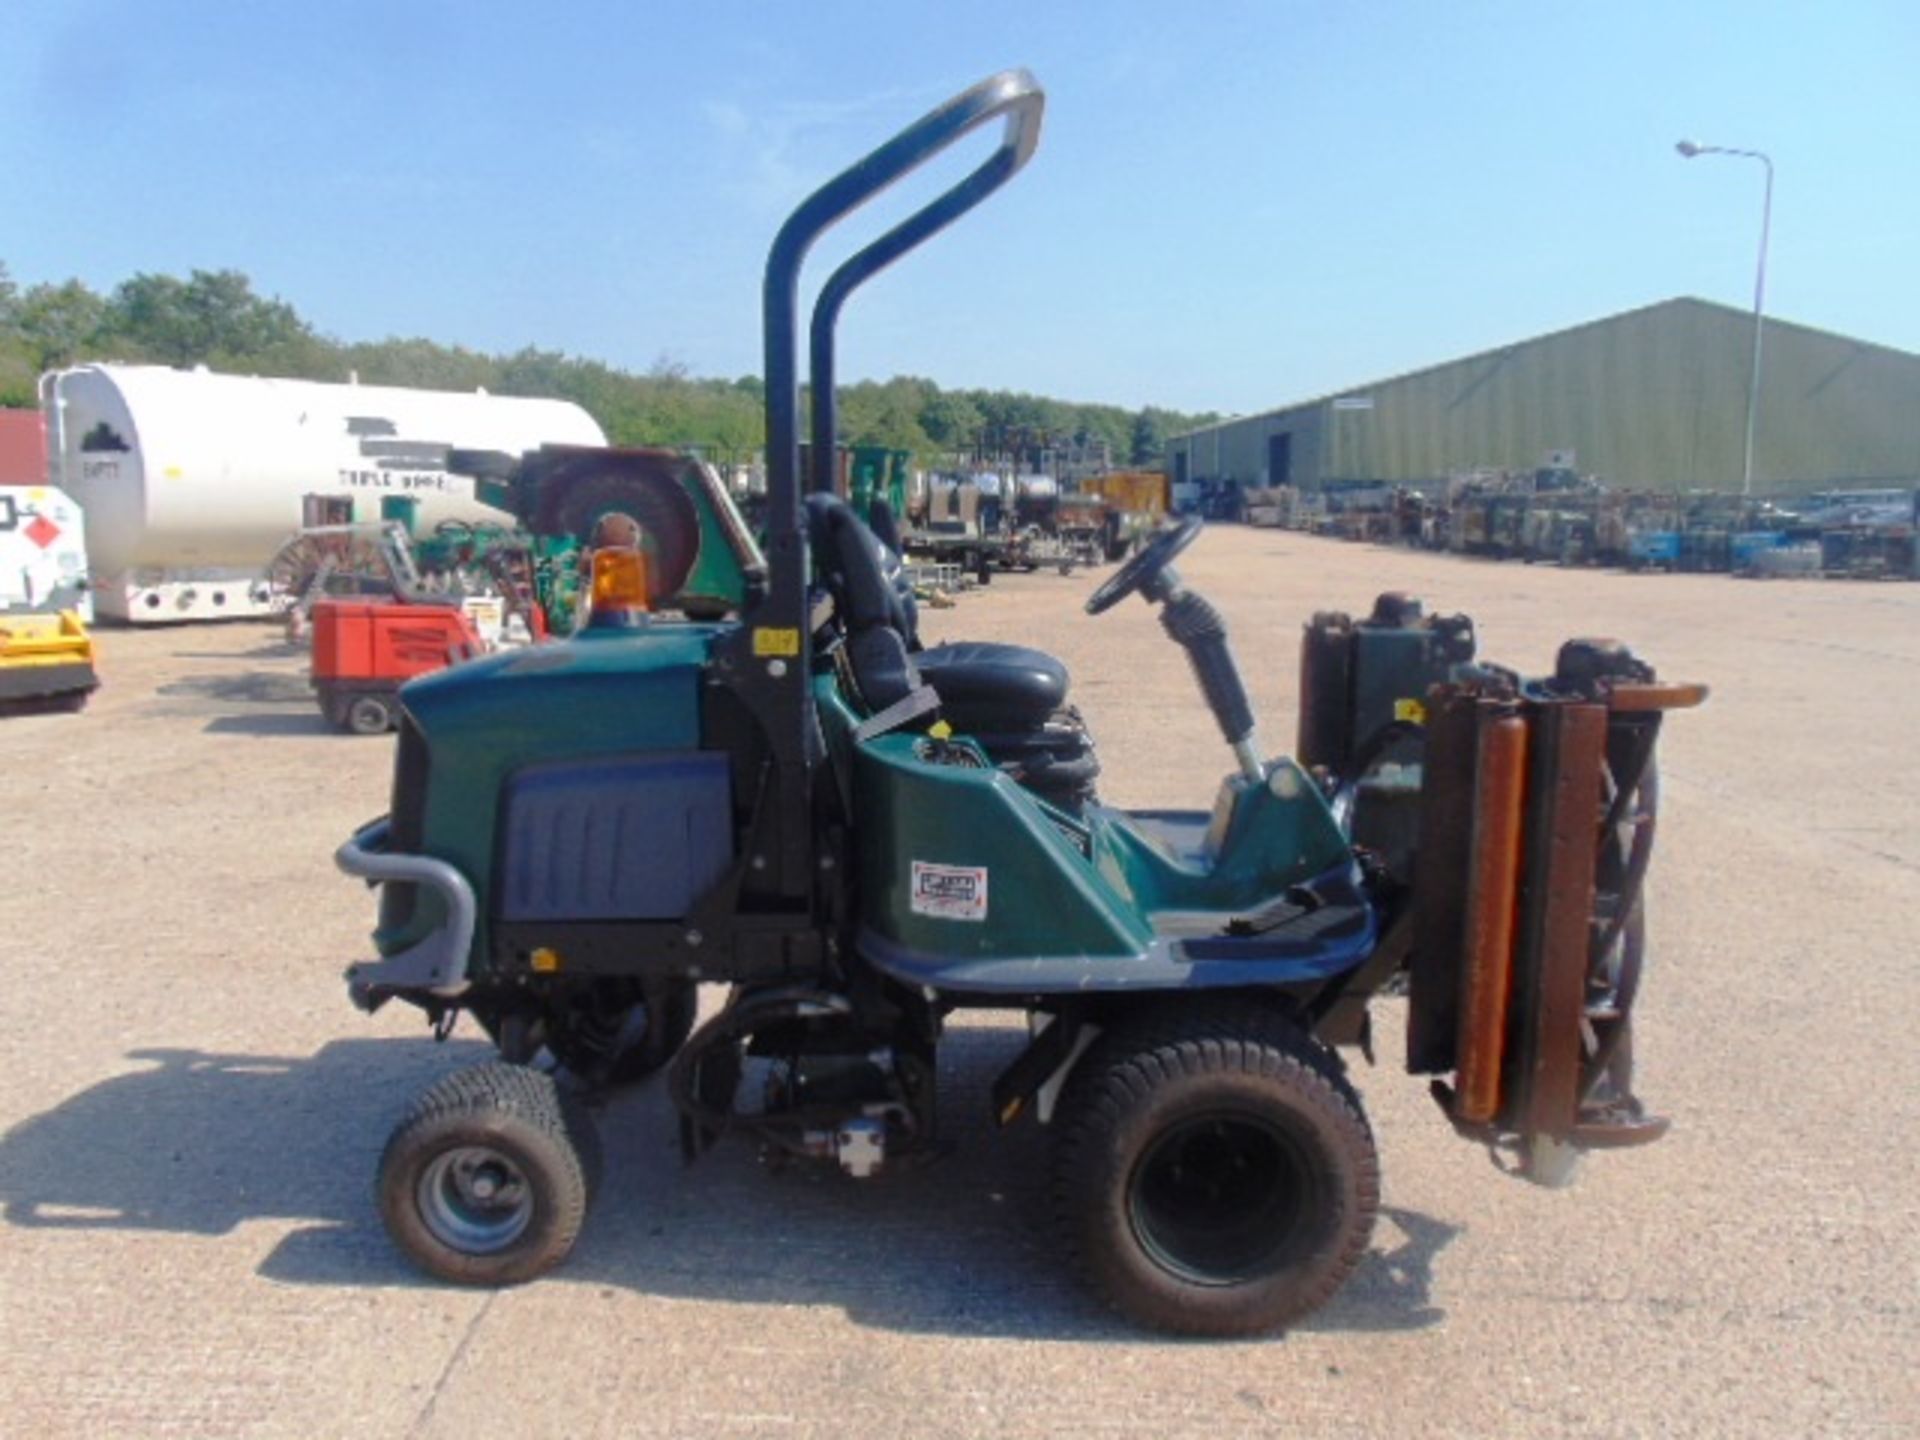 2008 Hayter LT322 Triple Gang Ride on Mower Council Owned - Image 9 of 23